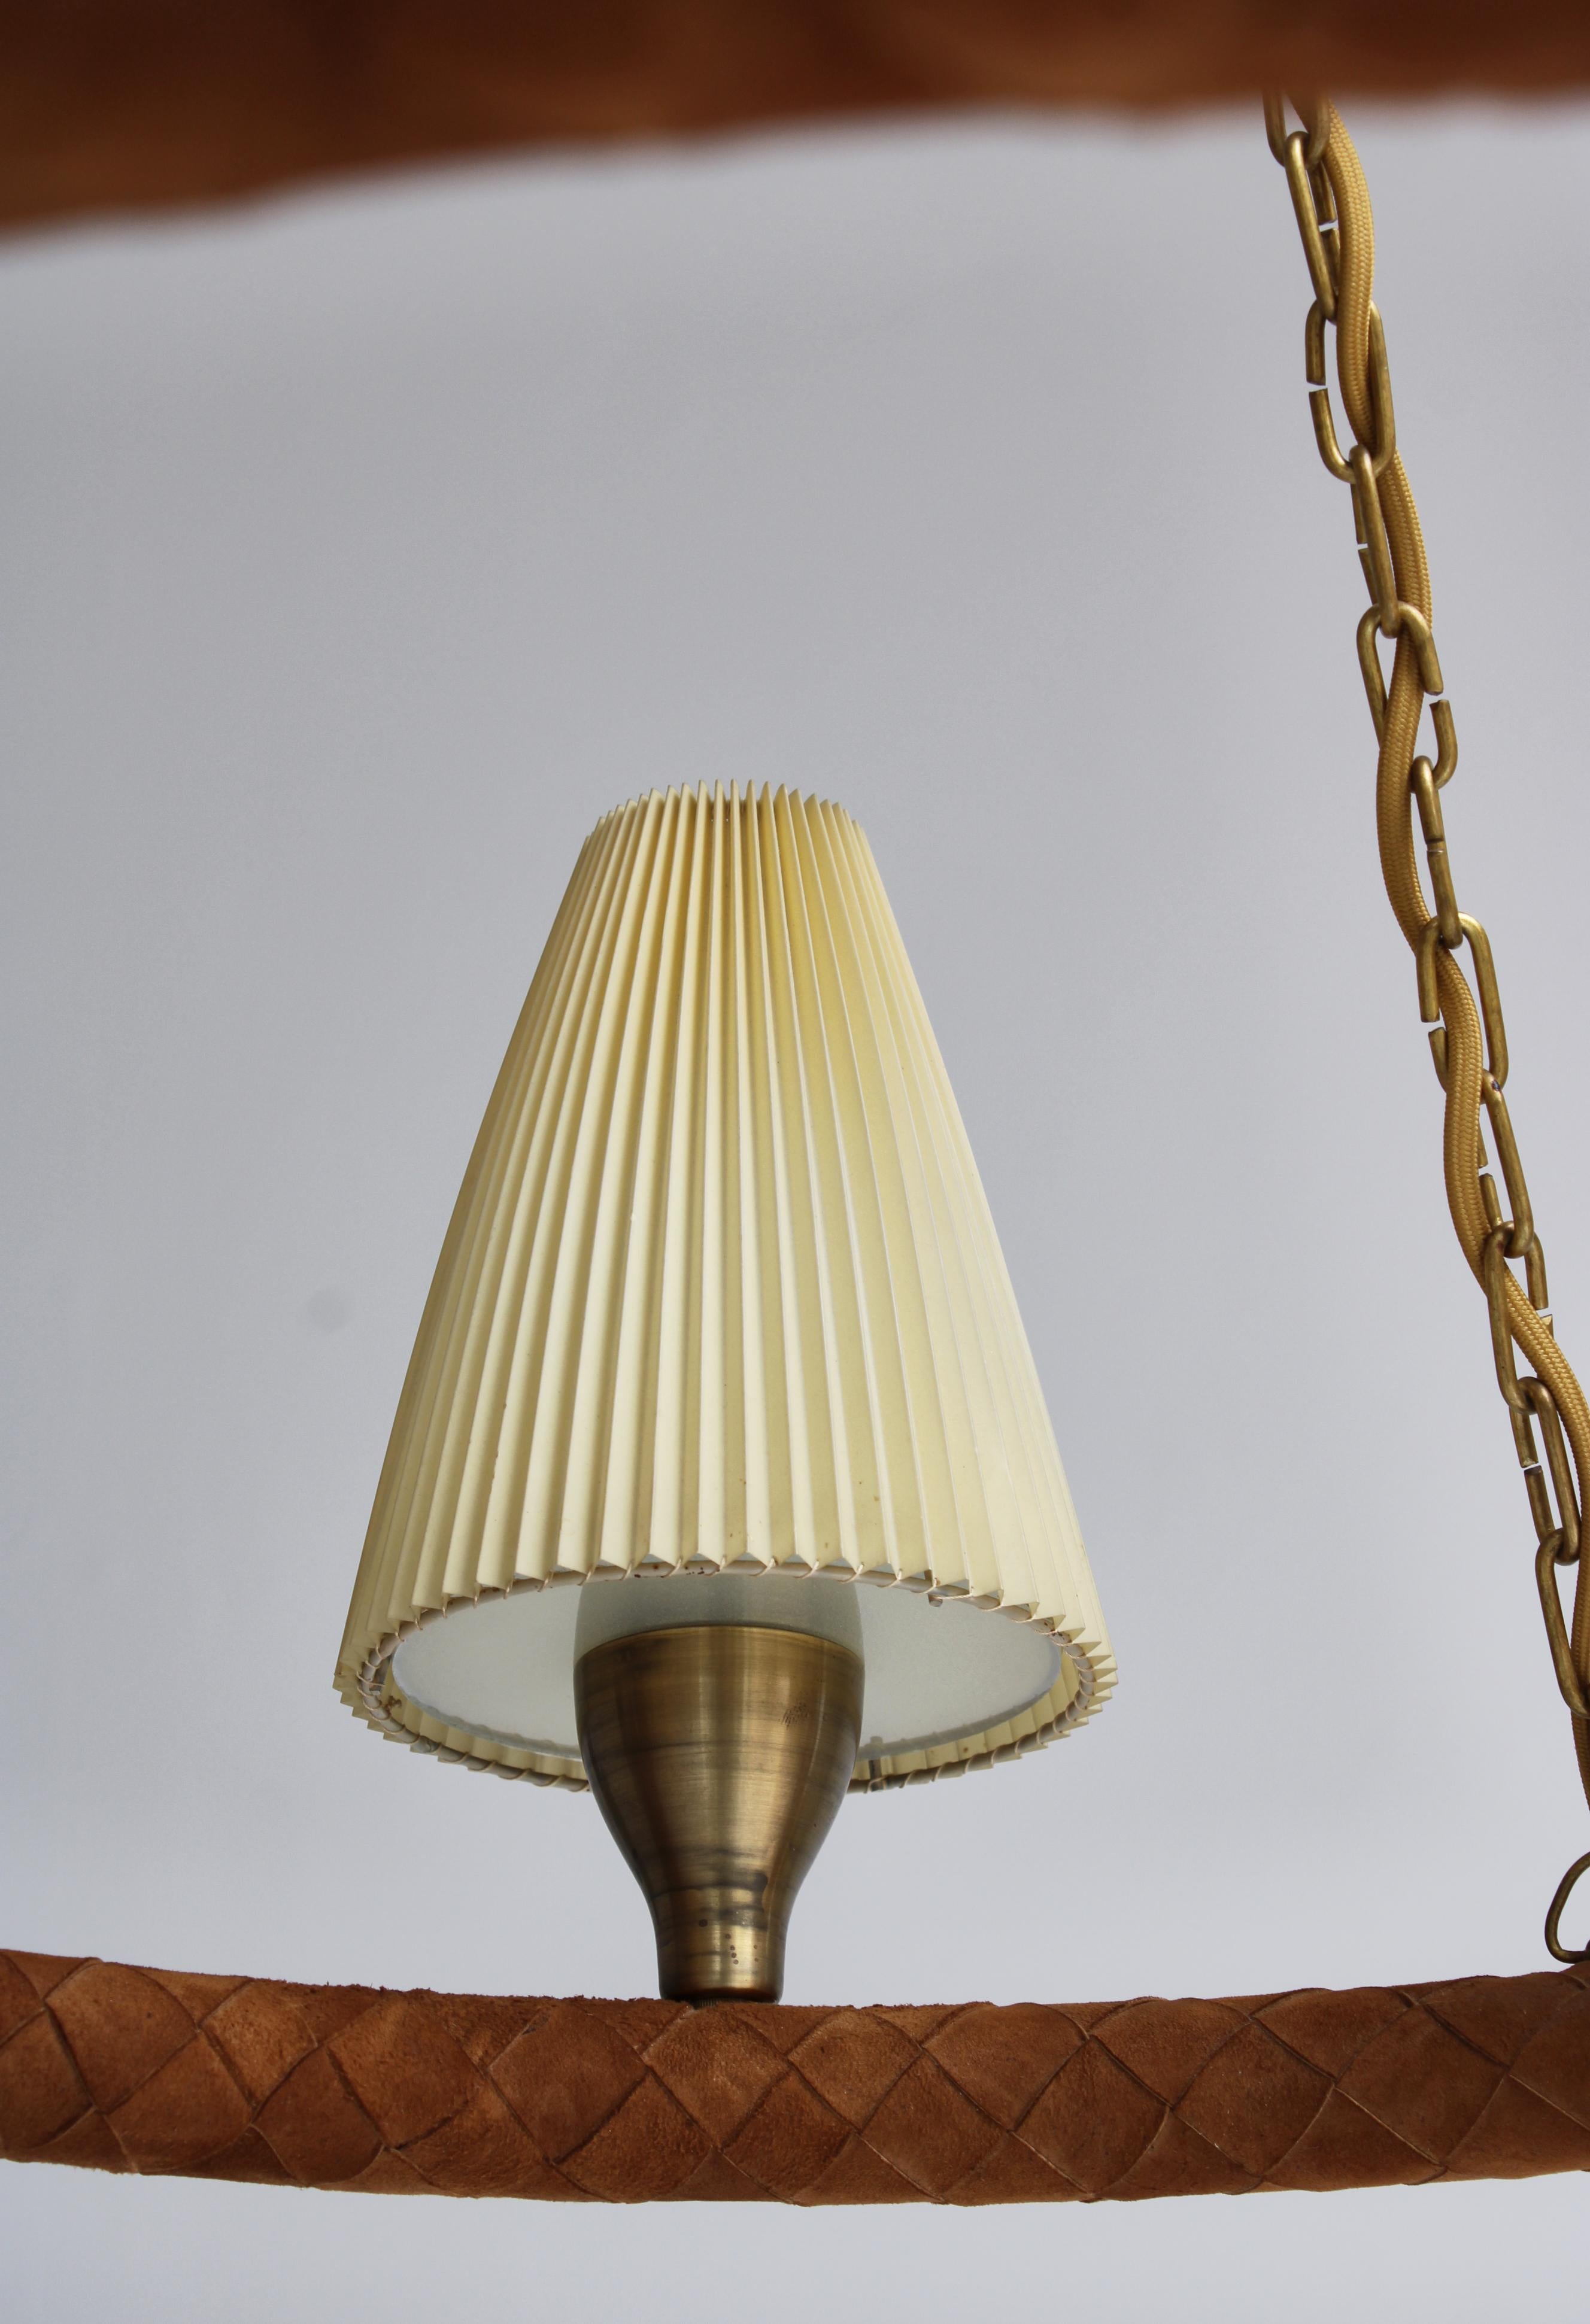 Danish Modern Chandelier in Leather, Brass and Glass by LYFA, Denmark, 1940s For Sale 13